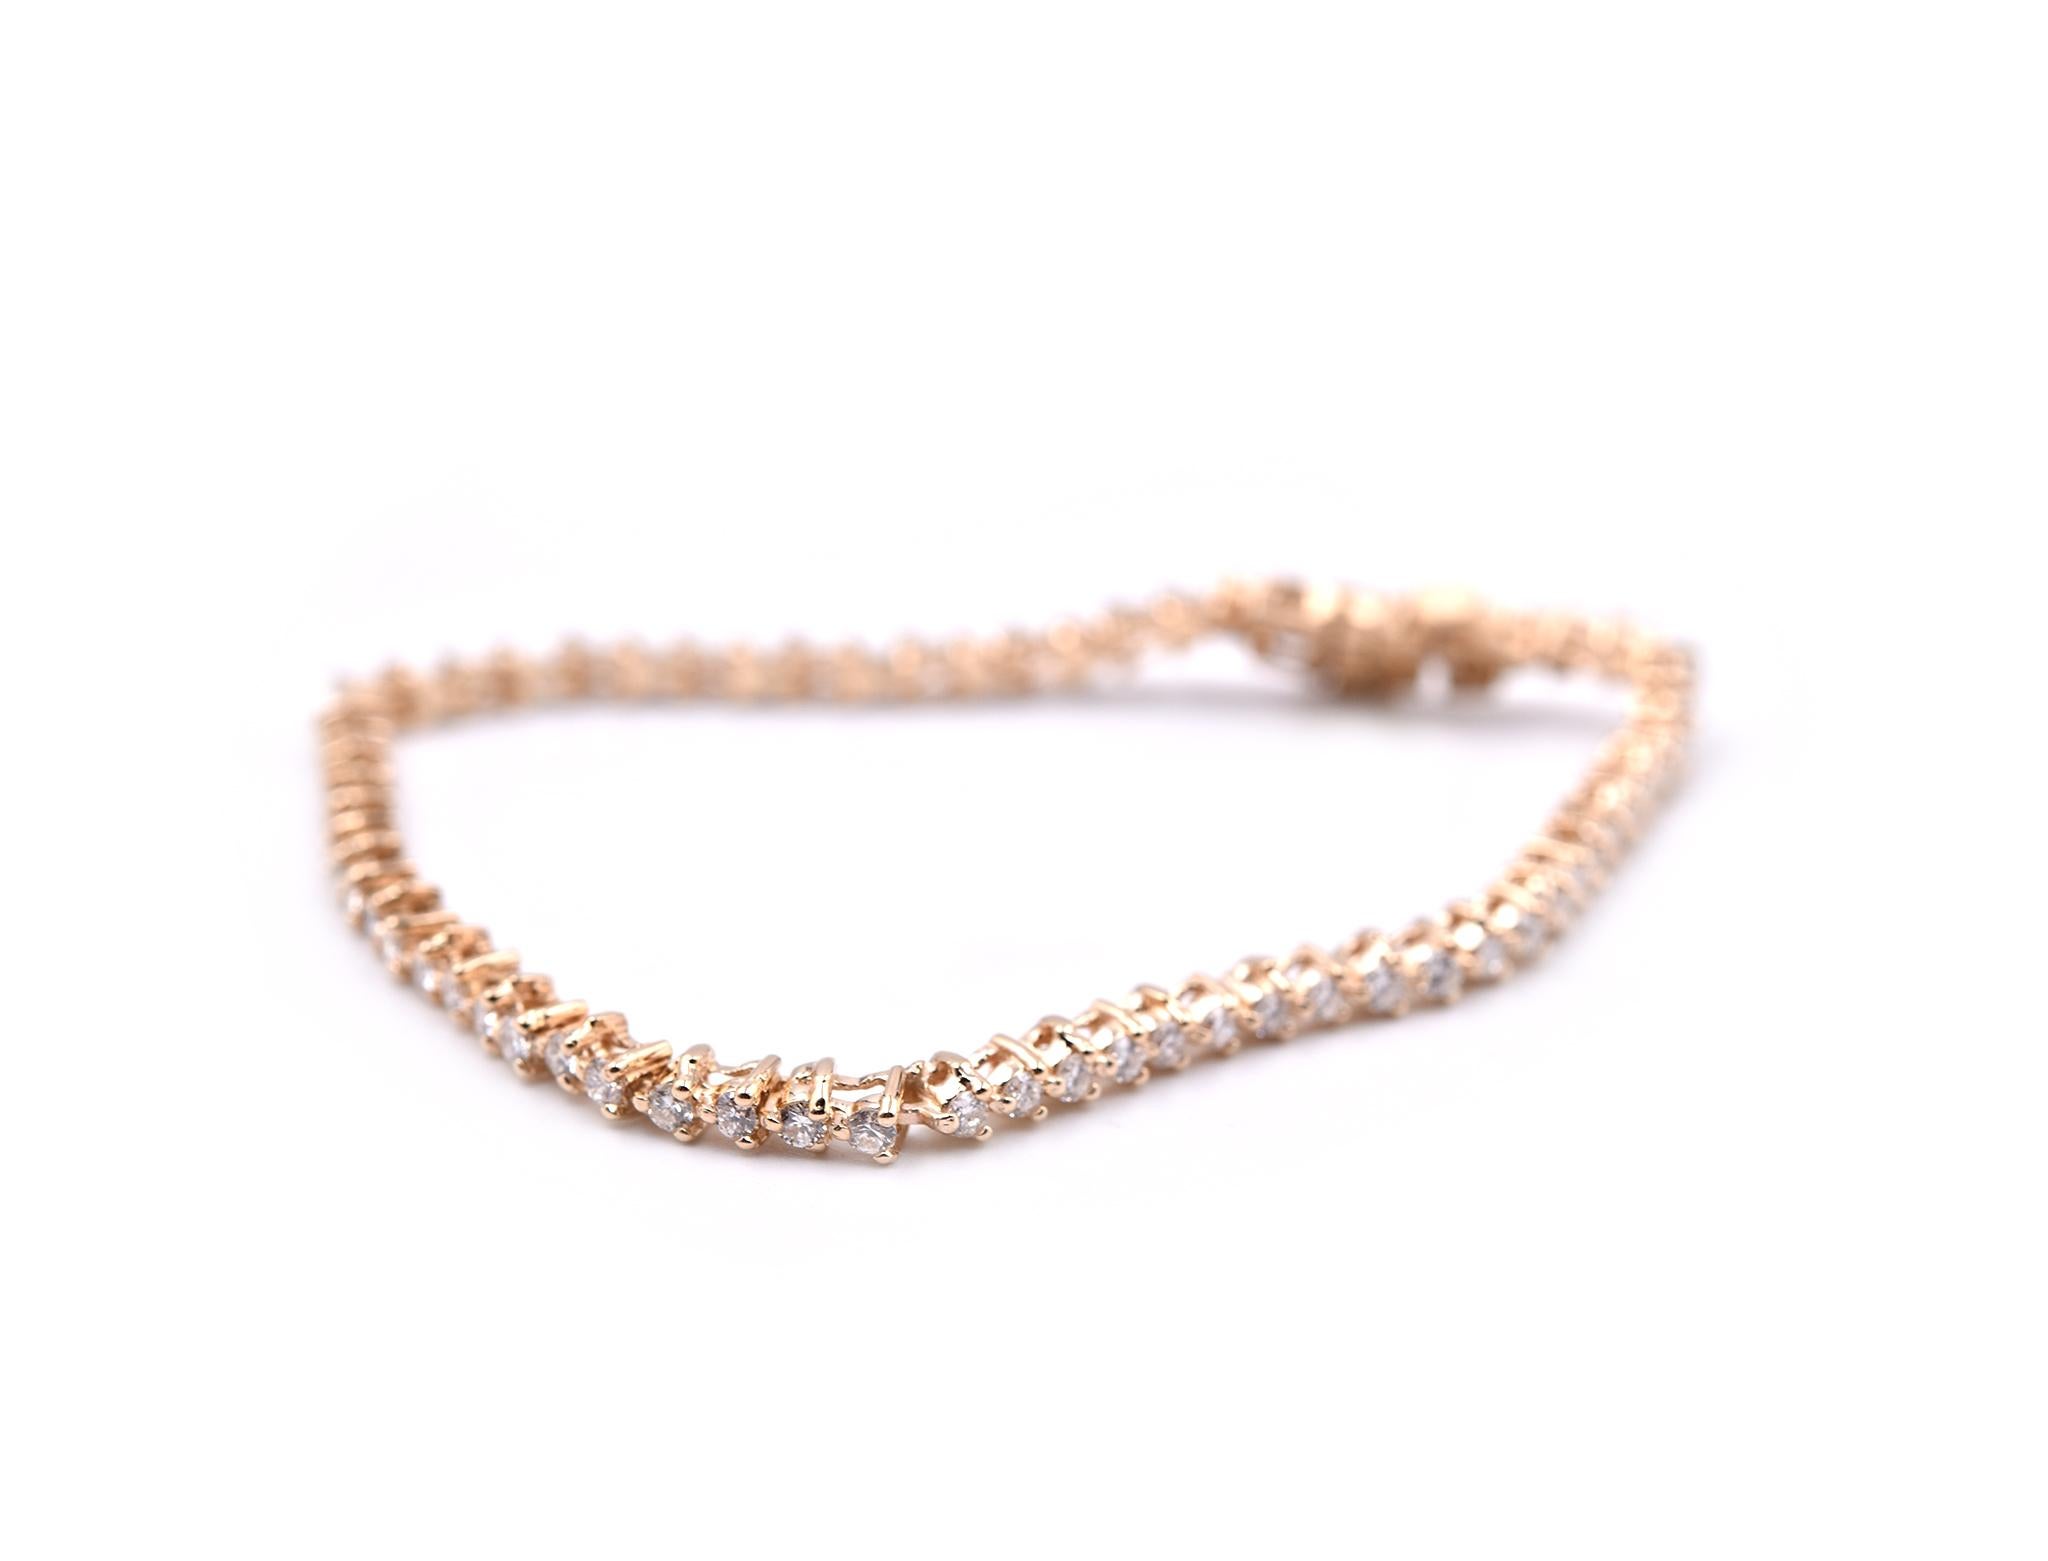 Designer: custom designed
Material: 14k yellow gold
Diamonds: 66 round brilliant cut= 1.98cttw
Color: G
Clarity: VS
Dimensions: bracelet is 7” inch long and it is approximately 3.27mm wide
Weight: 8.64 grams
